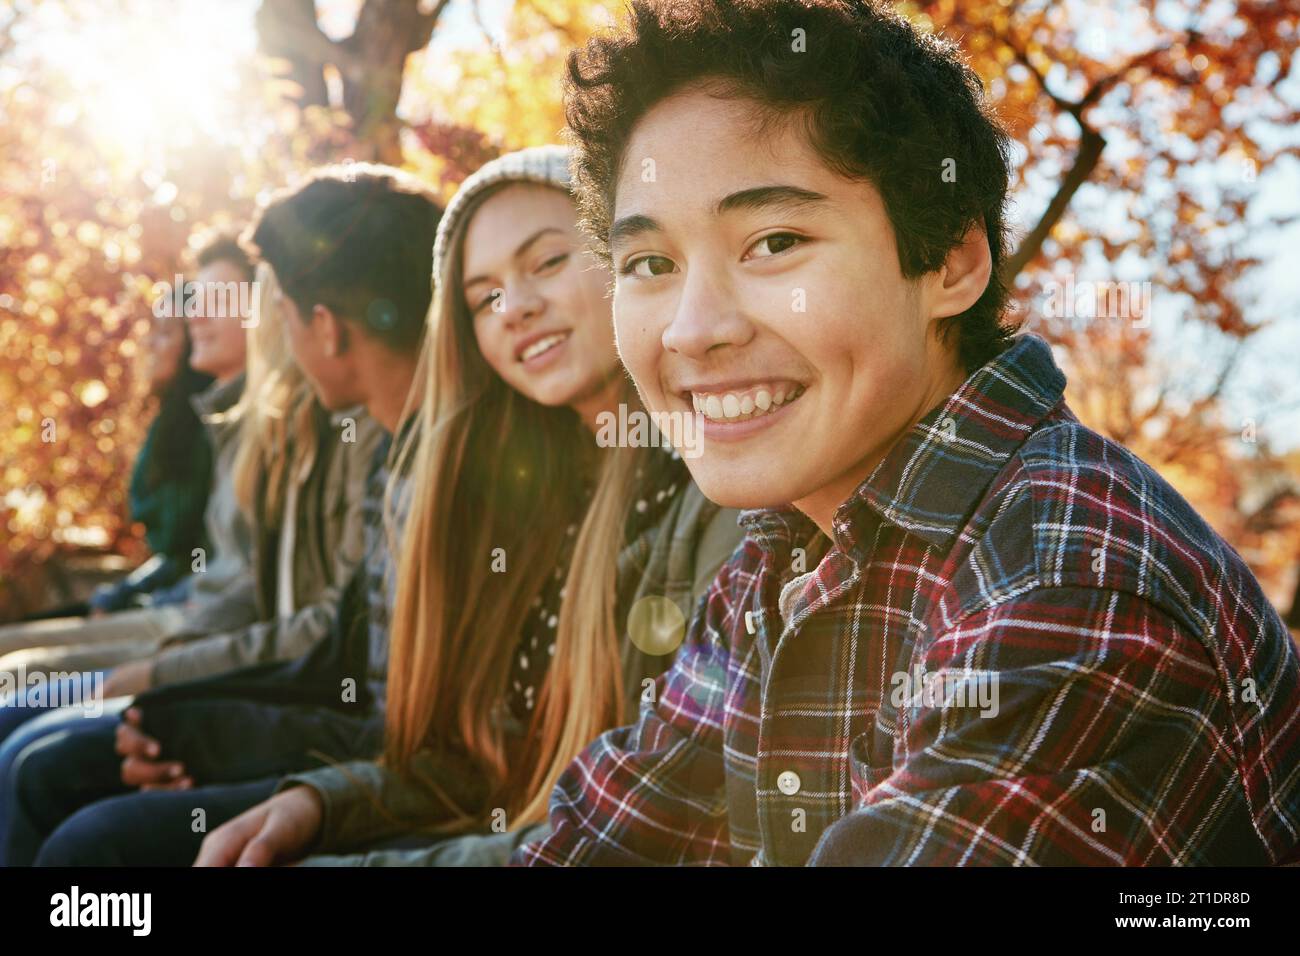 Teenager, group and portrait in park, boy and together on holiday, nature and relax by trees. Youth culture, happy friends and gen z school kids in Stock Photo